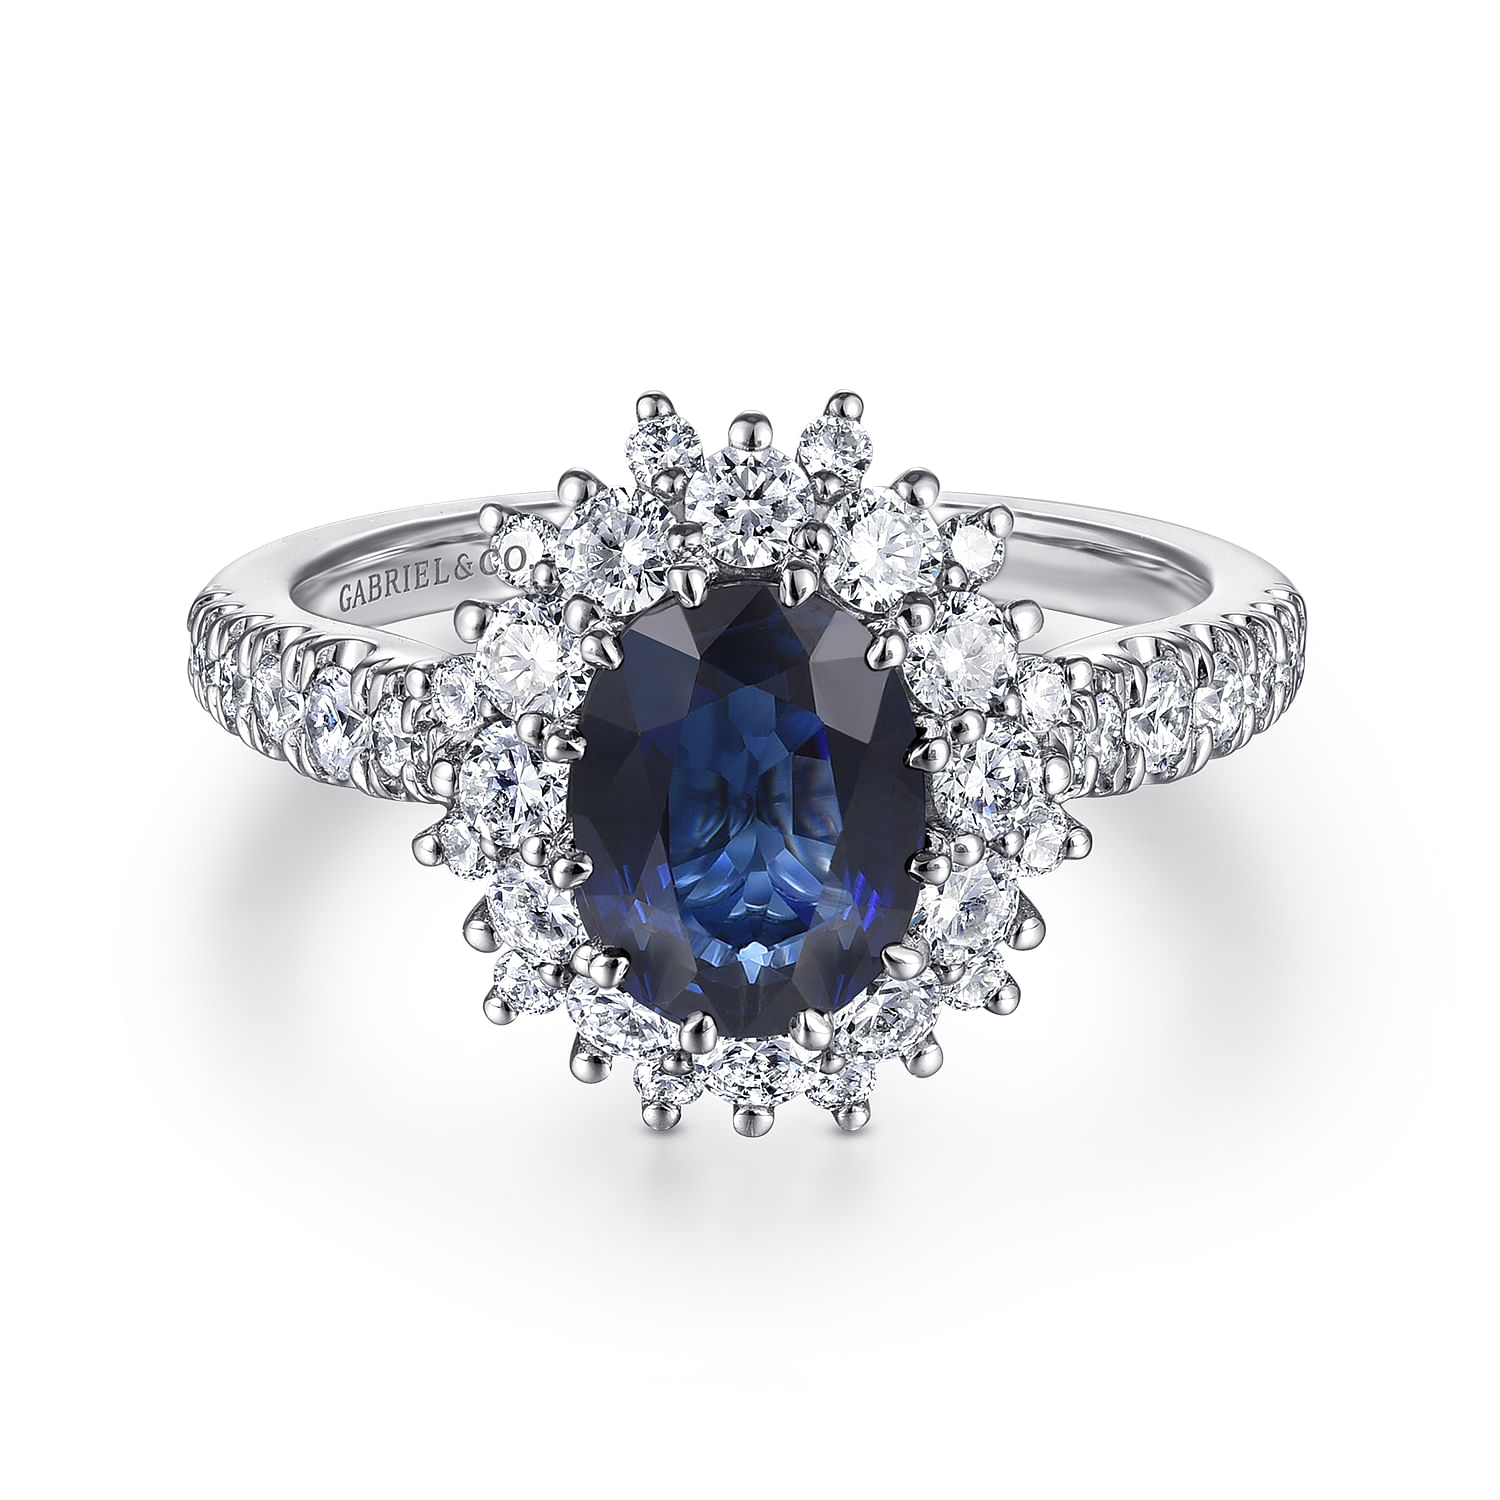 Imani---14K-White-Gold-Oval-Halo-Sapphire-and-Diamond-Engagement-Ring1